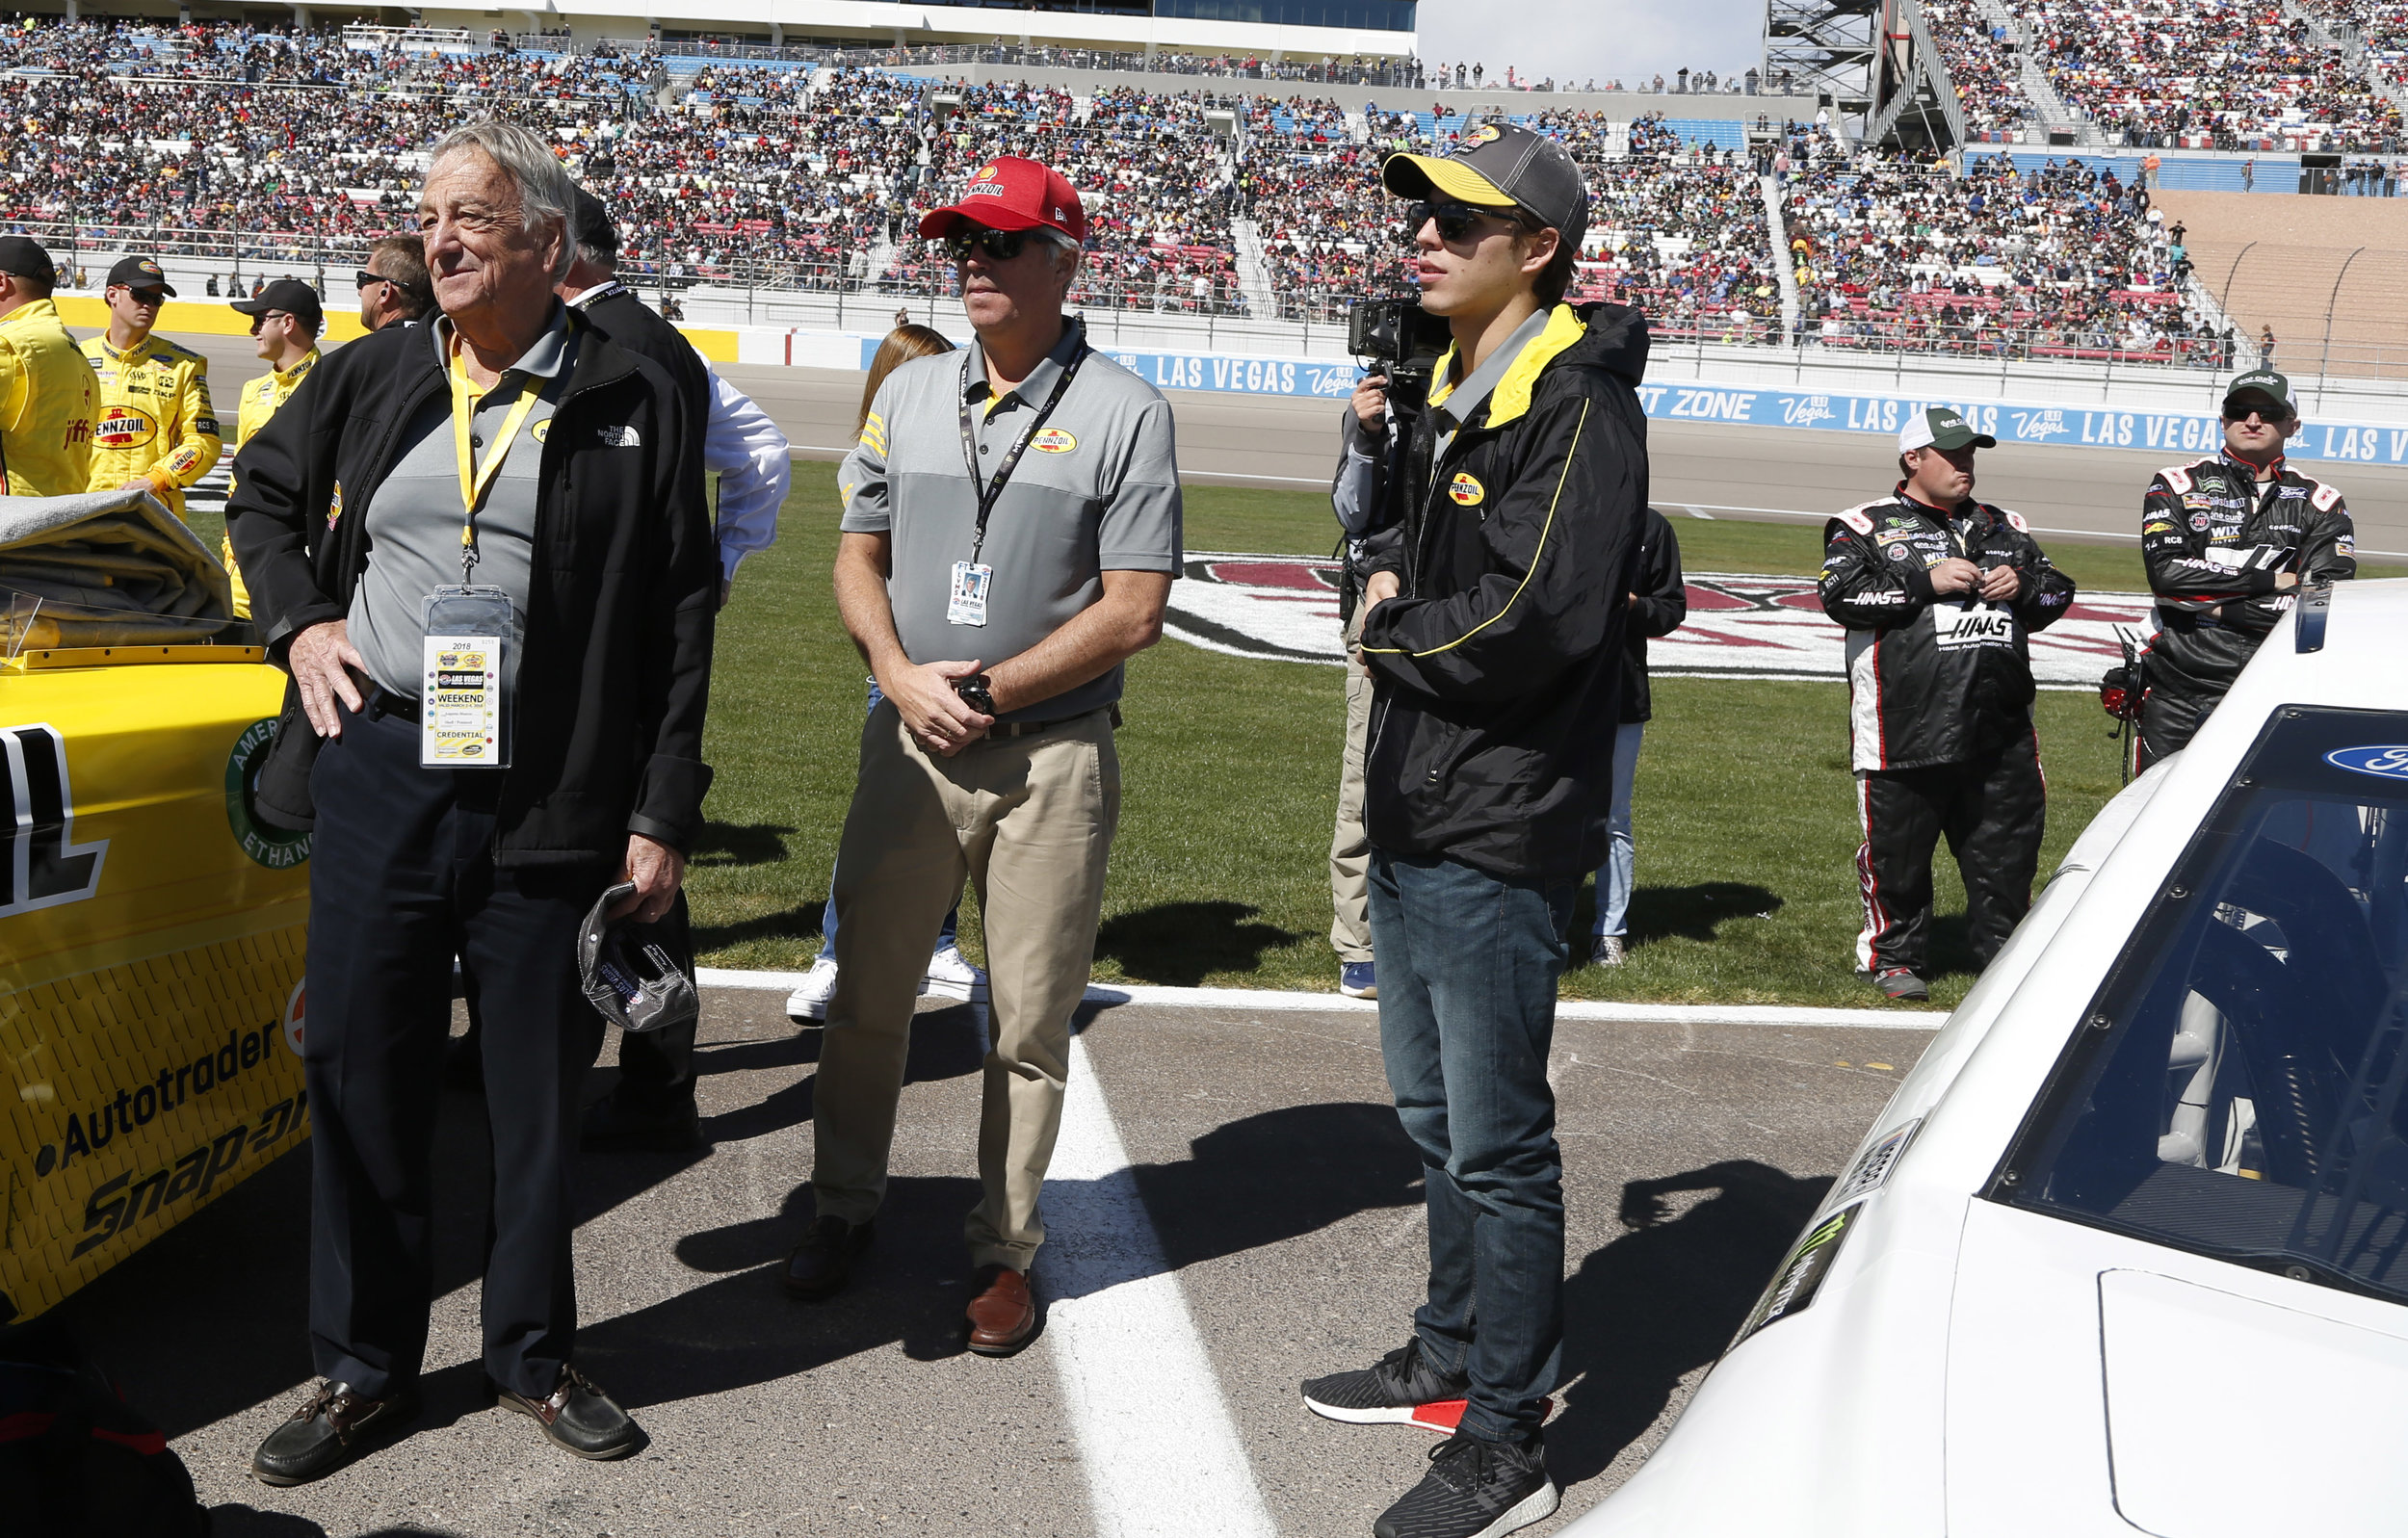 The Maurer family visits the grid ahead of the Pennzoil 400